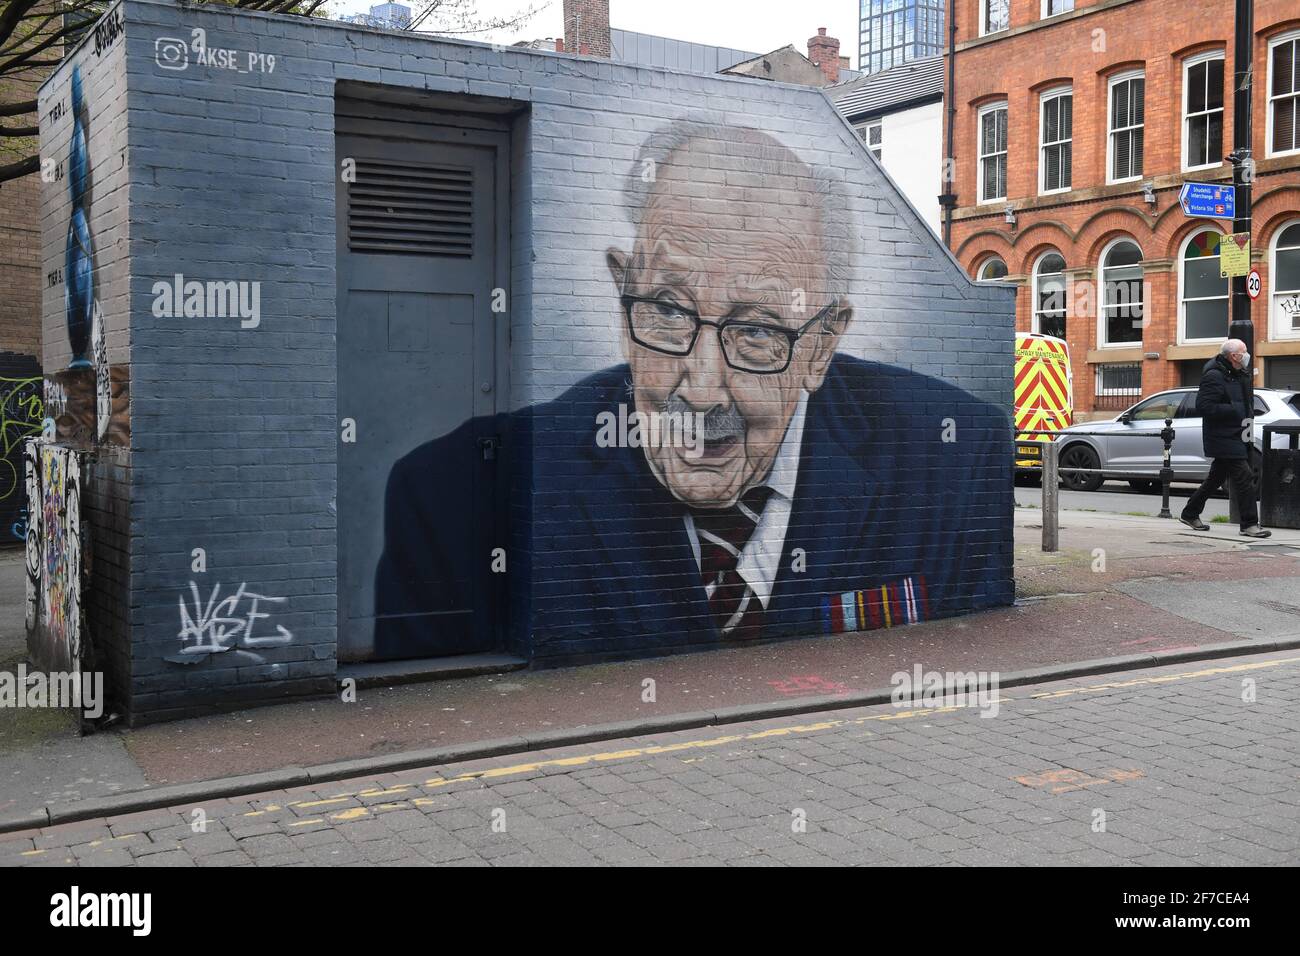 Sir Captain Tom Moore Mural Manchester  - local street artist Akse-P19 has painted the Mural  on the corner of Tib Street and Thomas Street,  Captain Stock Photo